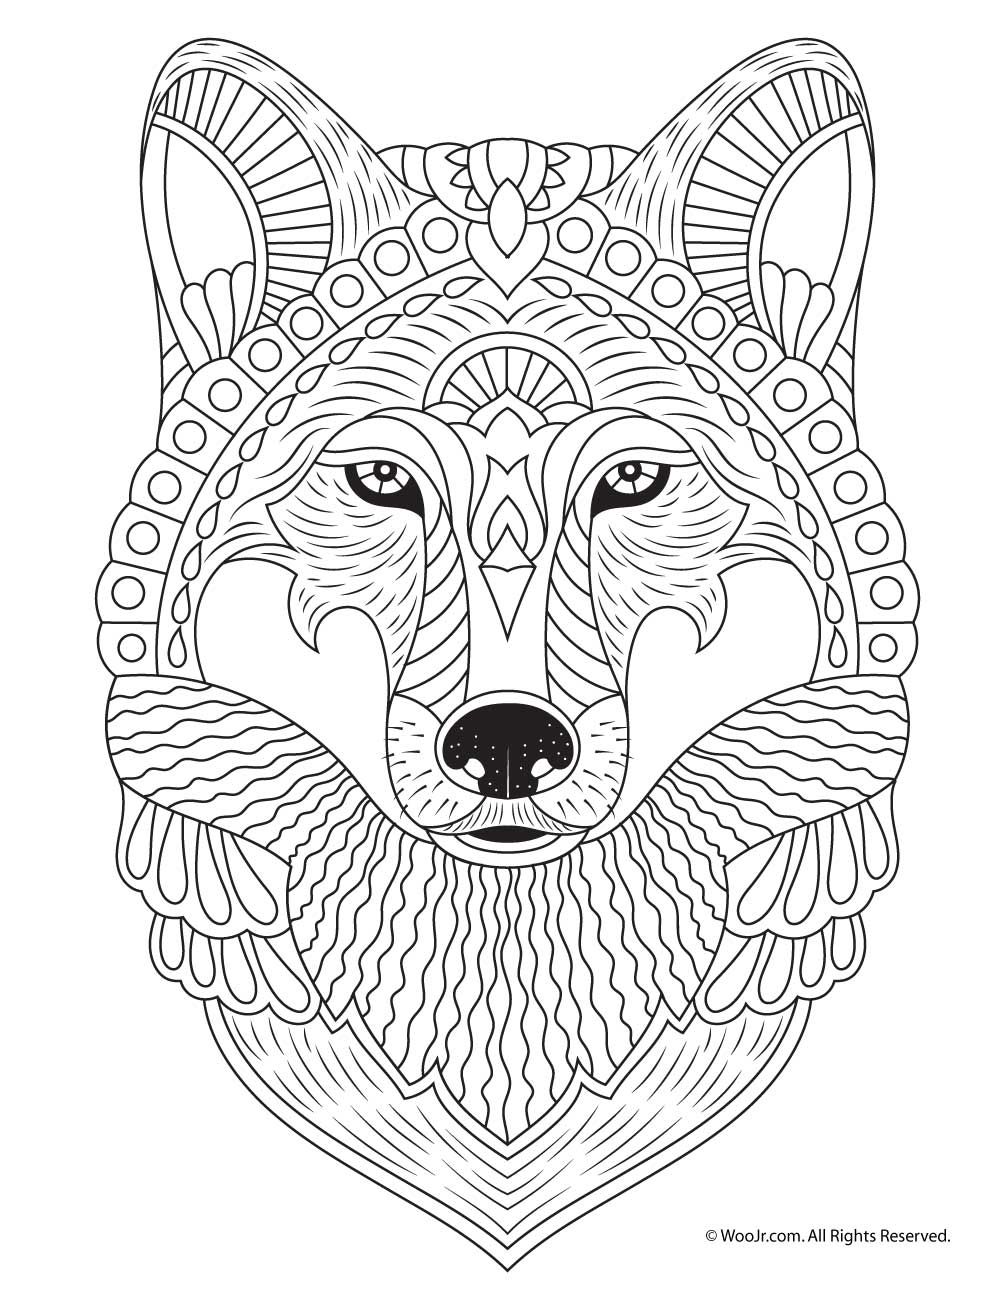 free printable coloring pages wolf desene de colorat lup 6 planse de colorat cu lup 6 printable wolf free pages coloring 